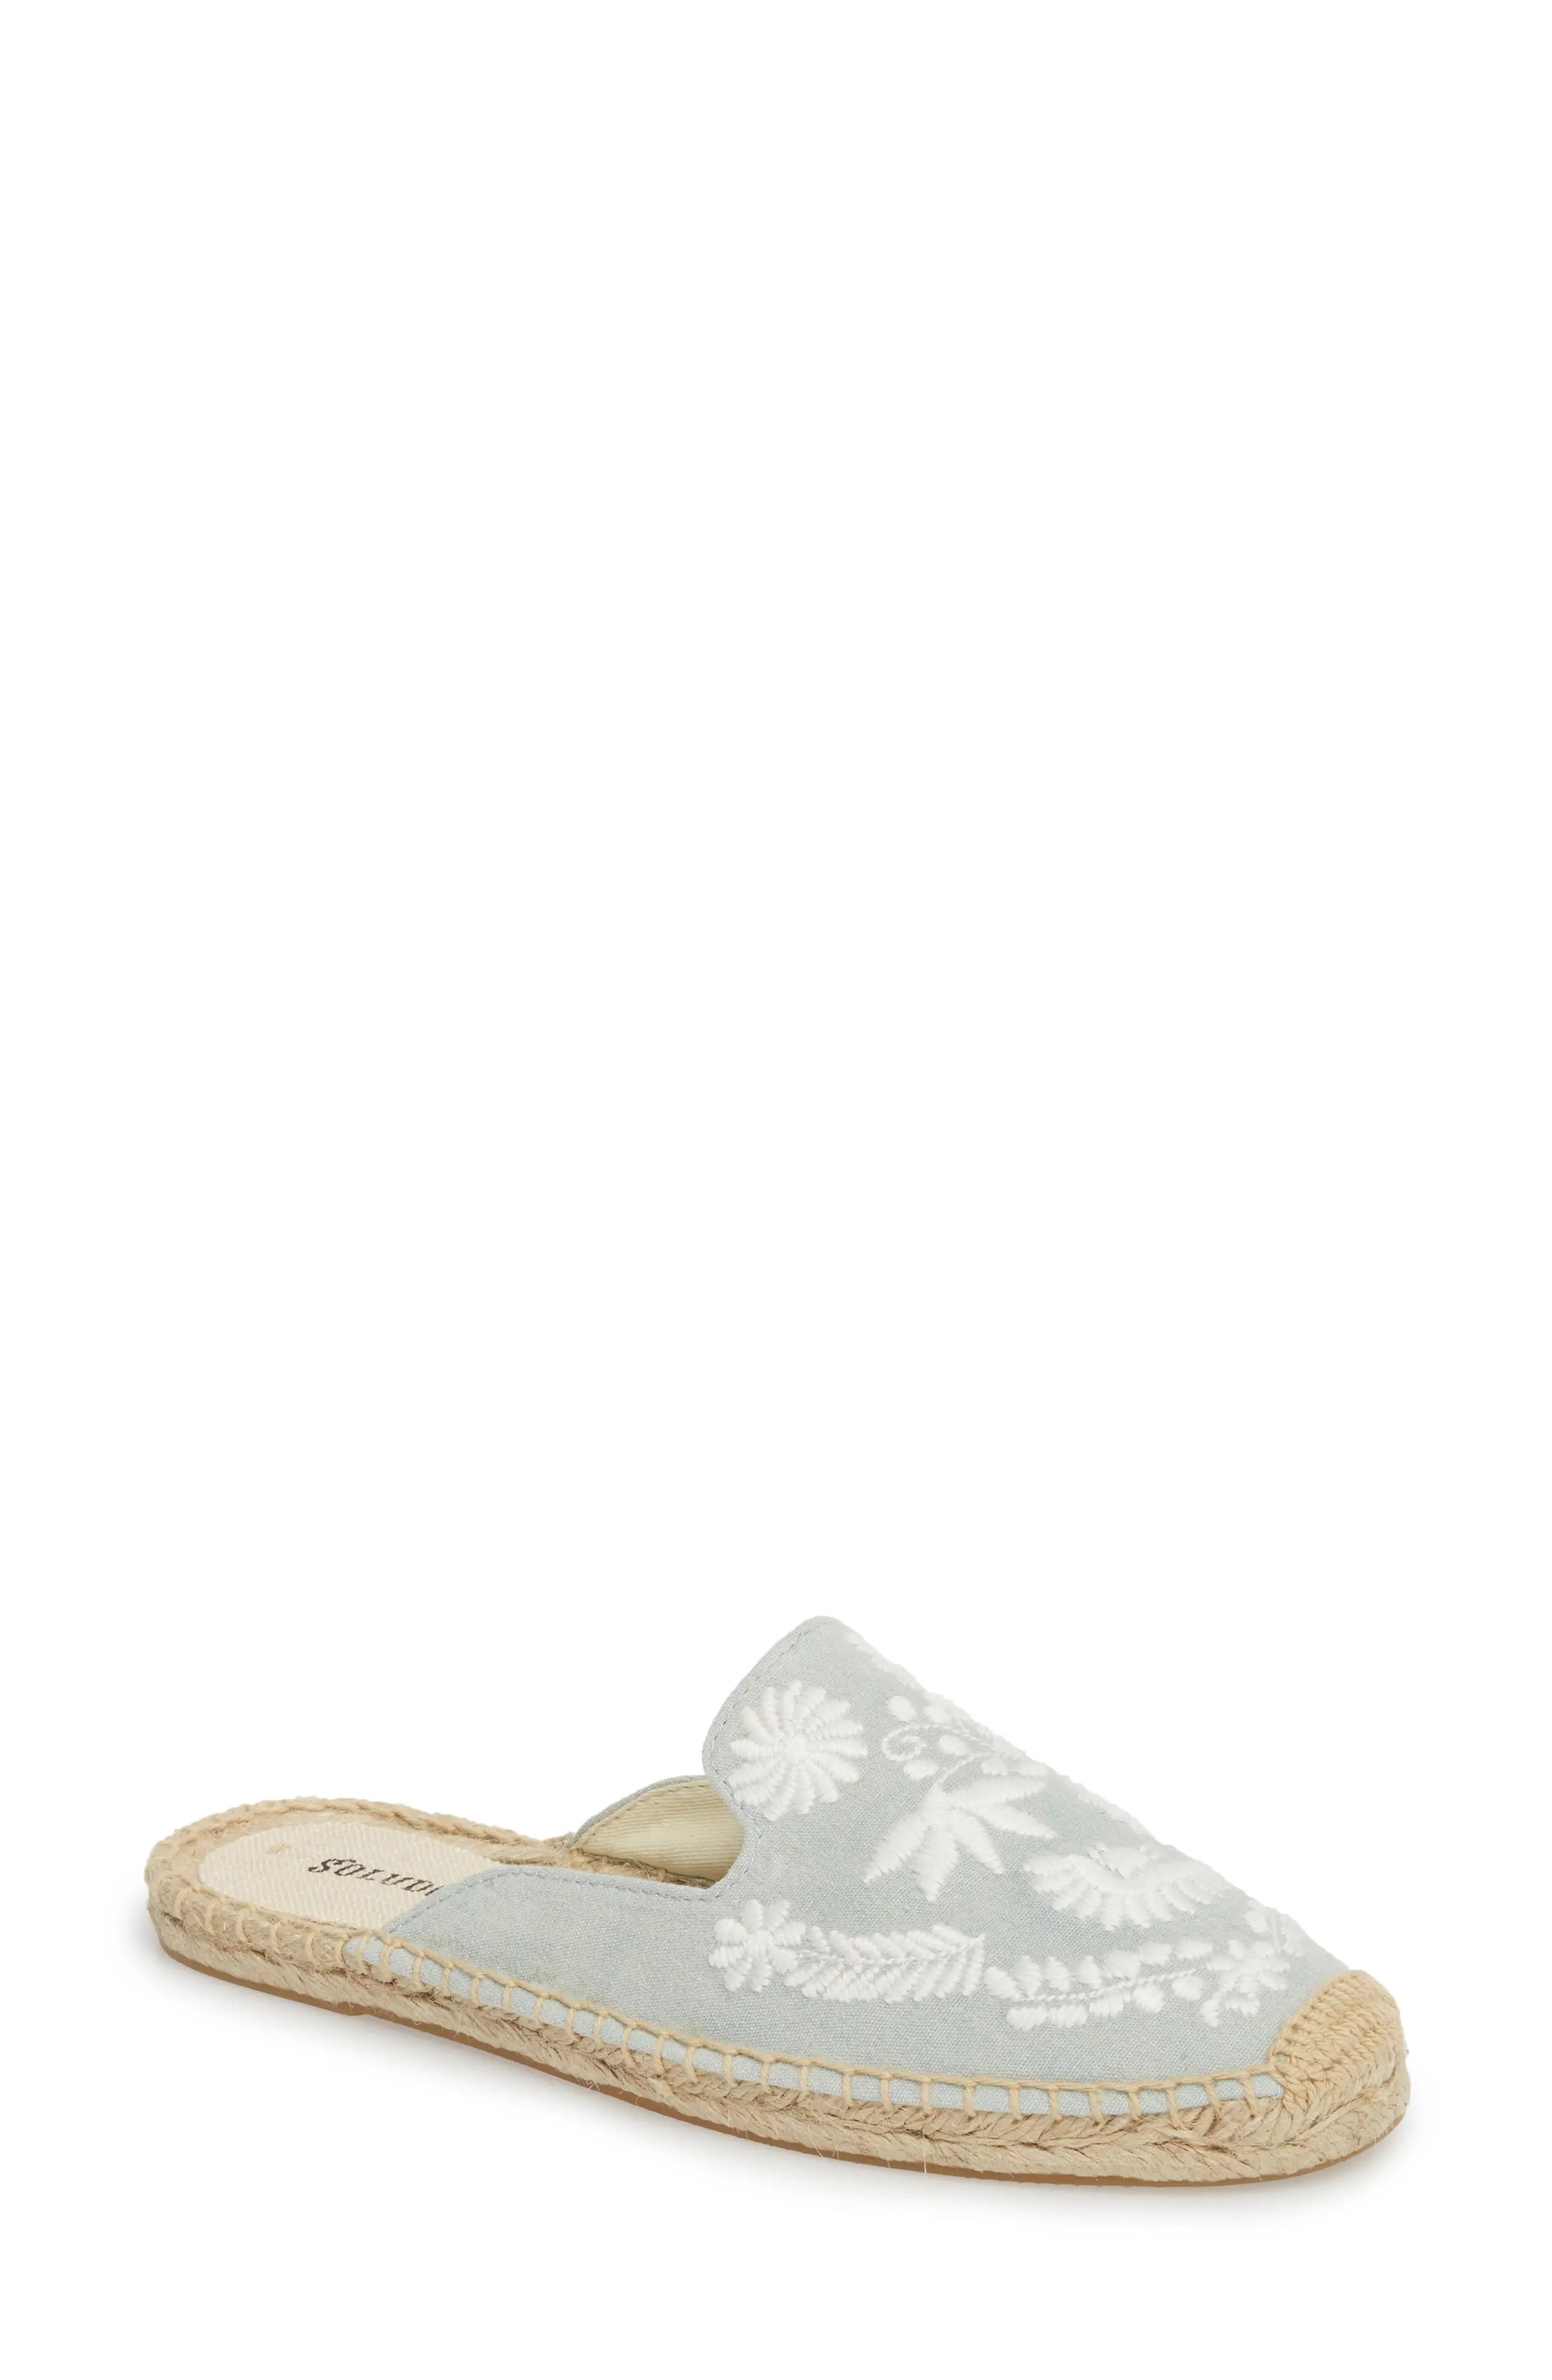 Soludos Ibiza Embroidered Loafer Mule (Women) | Nordstrom